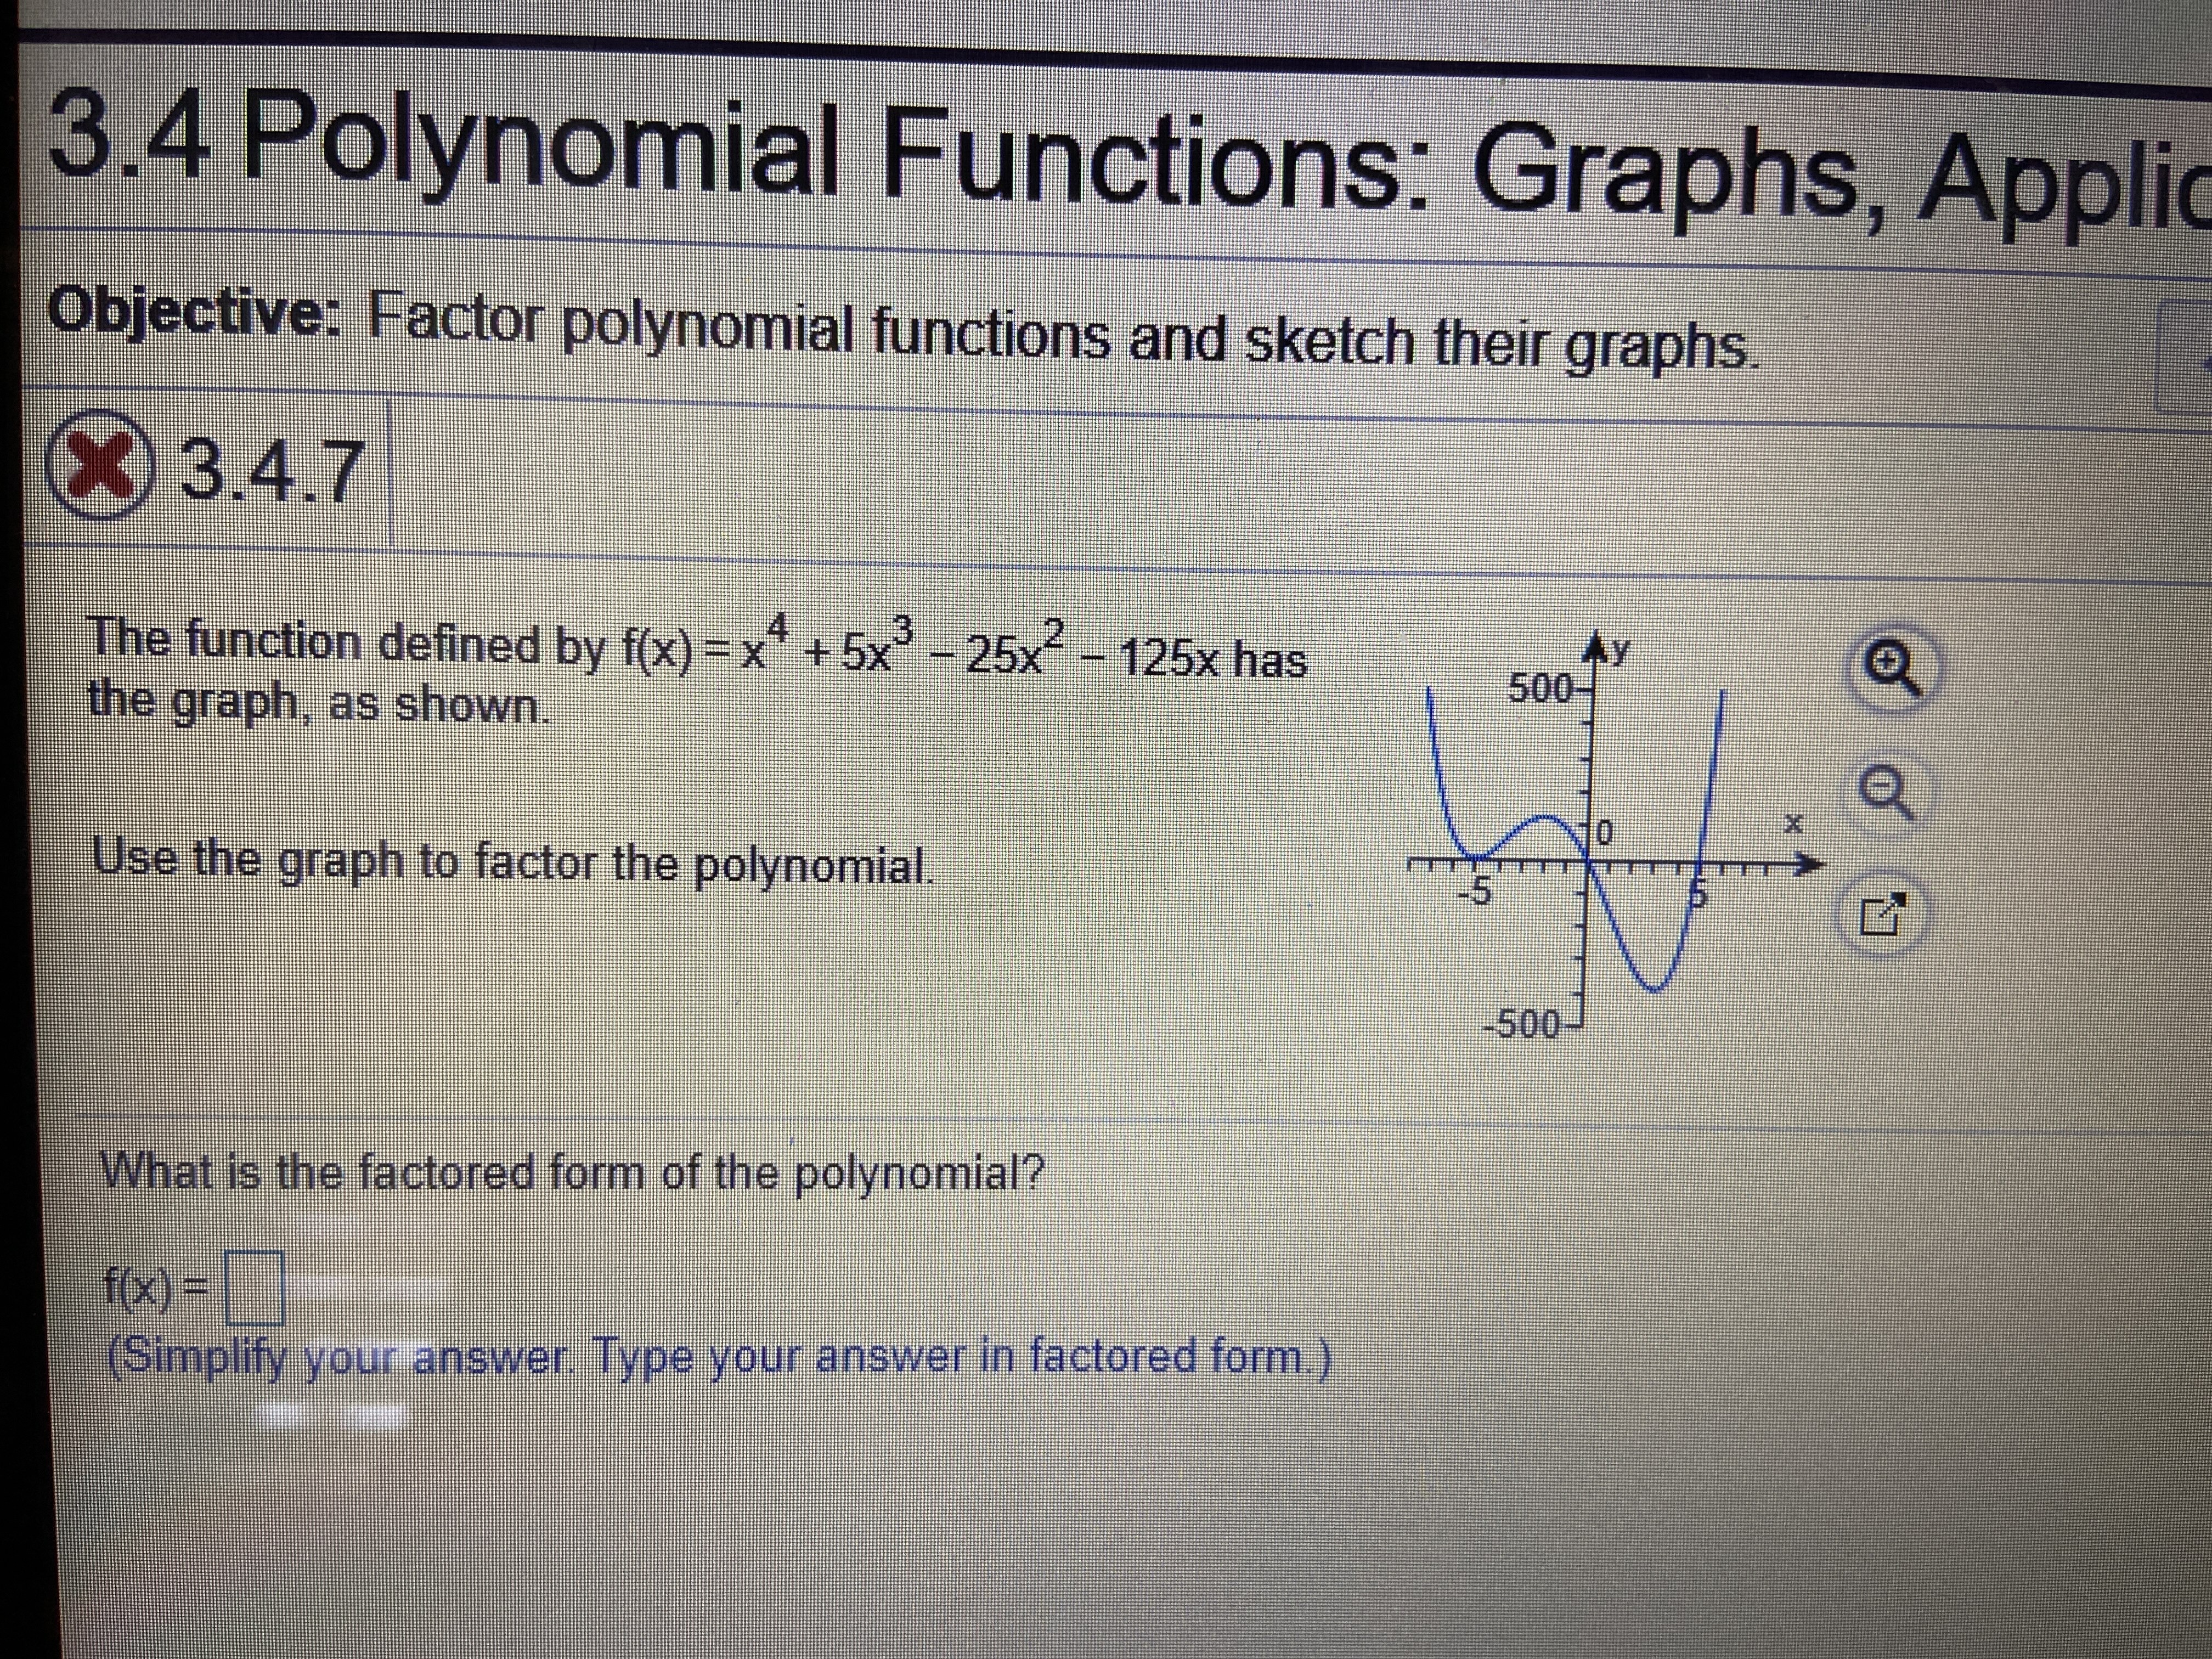 Sketch Polynomial Function from Given Characteristics - YouTube